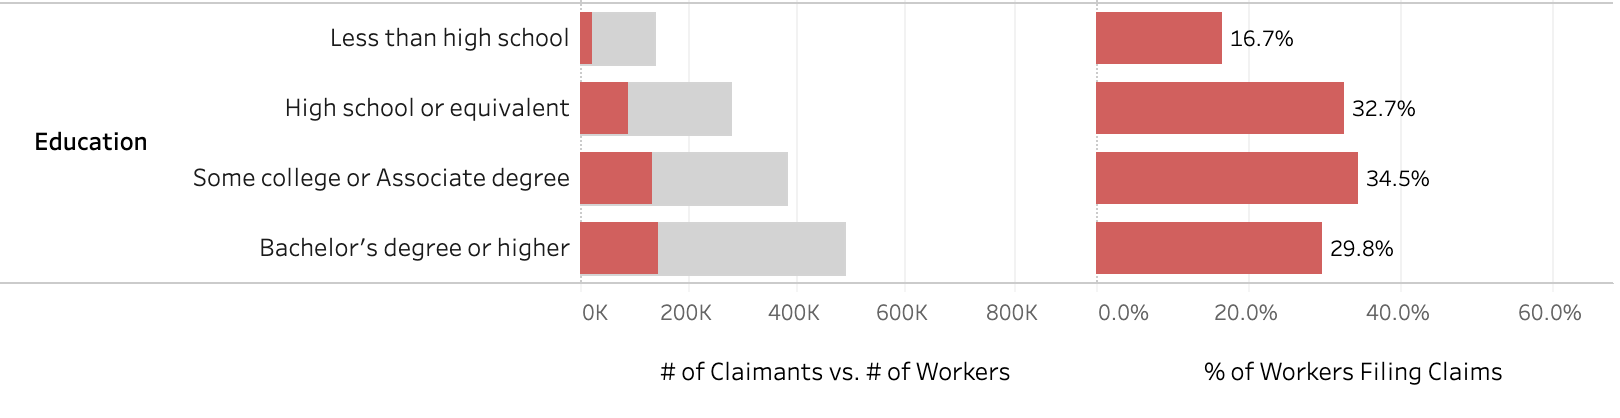 chart depicting the % of workers filing claims for unemployment, by education level